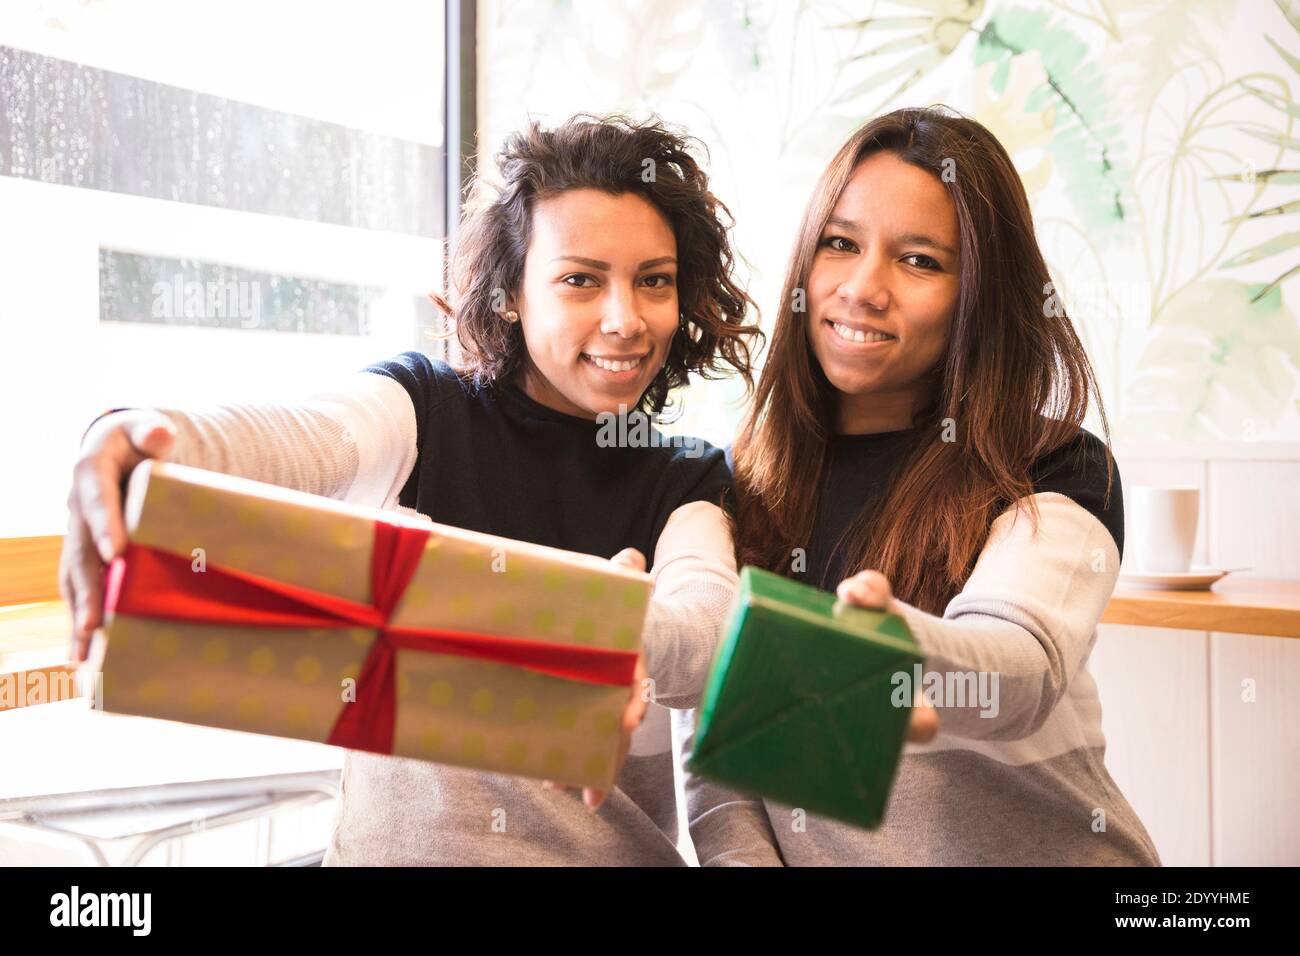 Two smiling latin girls showing off a present. They are inside a coffee shop. Stock Photo